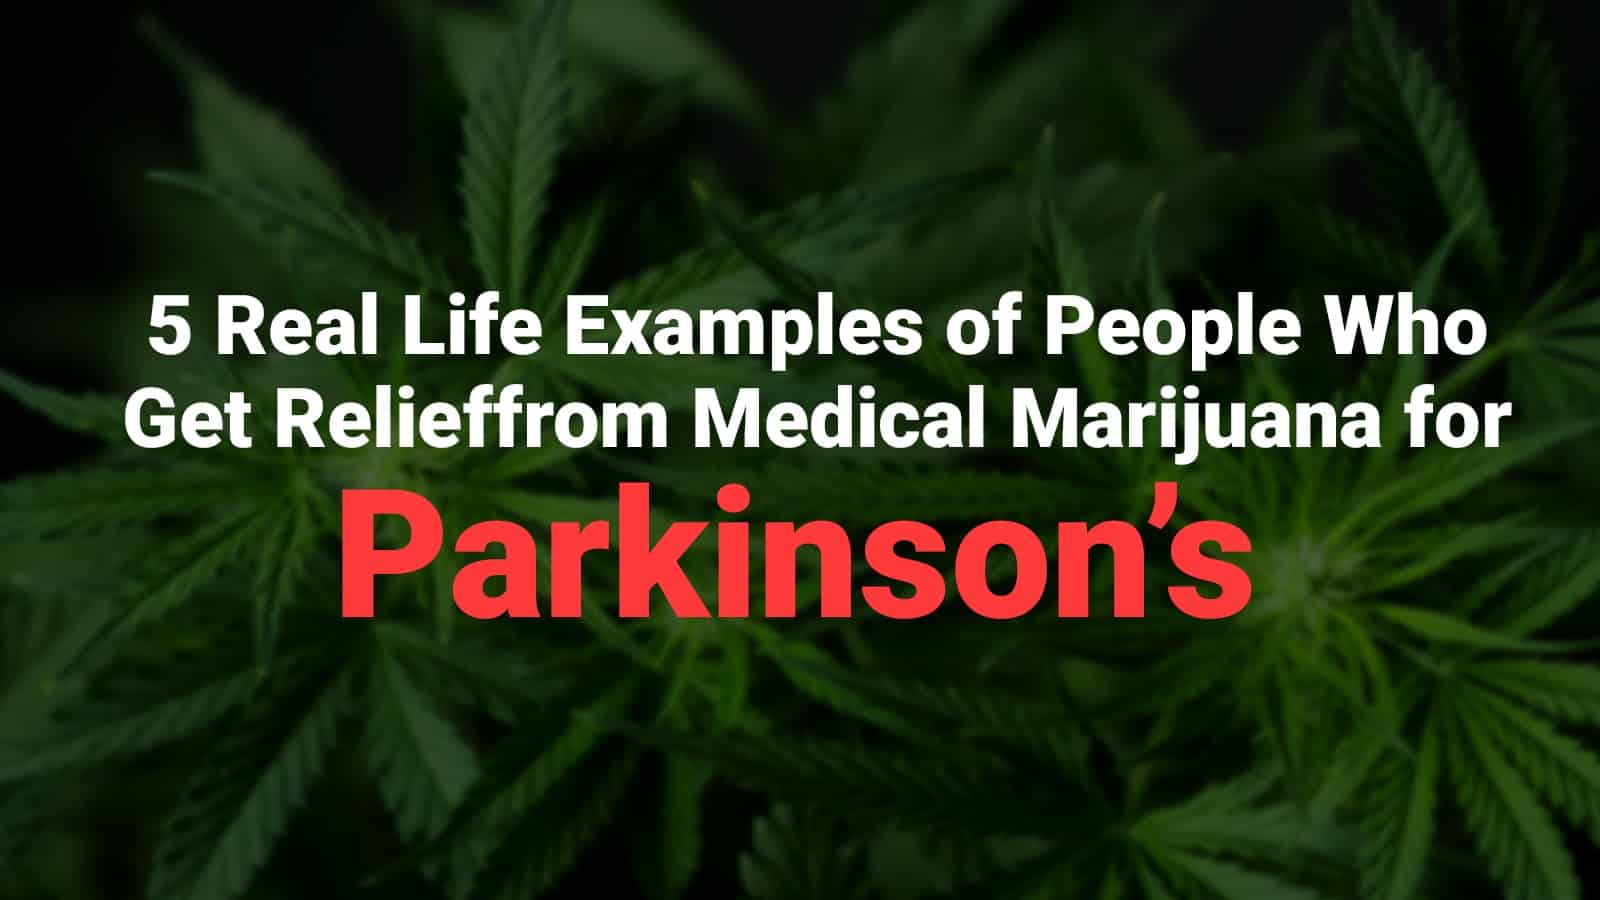 5 Real Life Examples of People Who Get Relief from Medical Marijuana for Parkinson’s